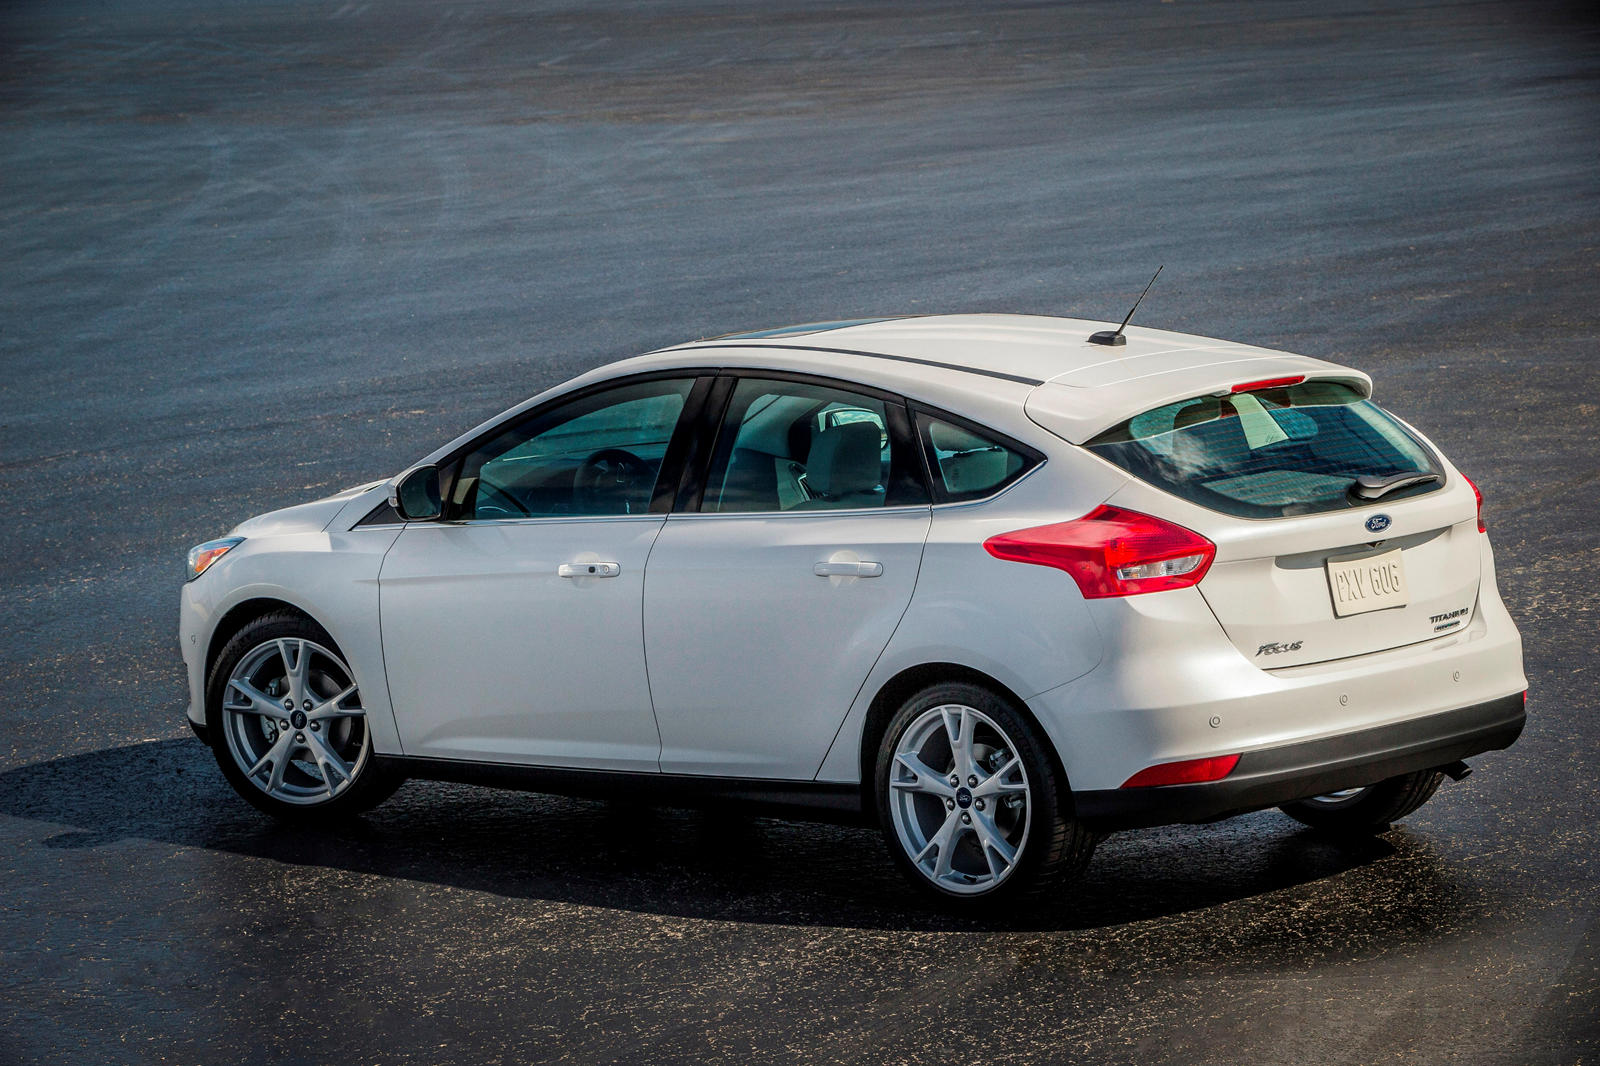 2018 Ford Focus Hatchback: Review, Trims, Specs, Price, New Interior